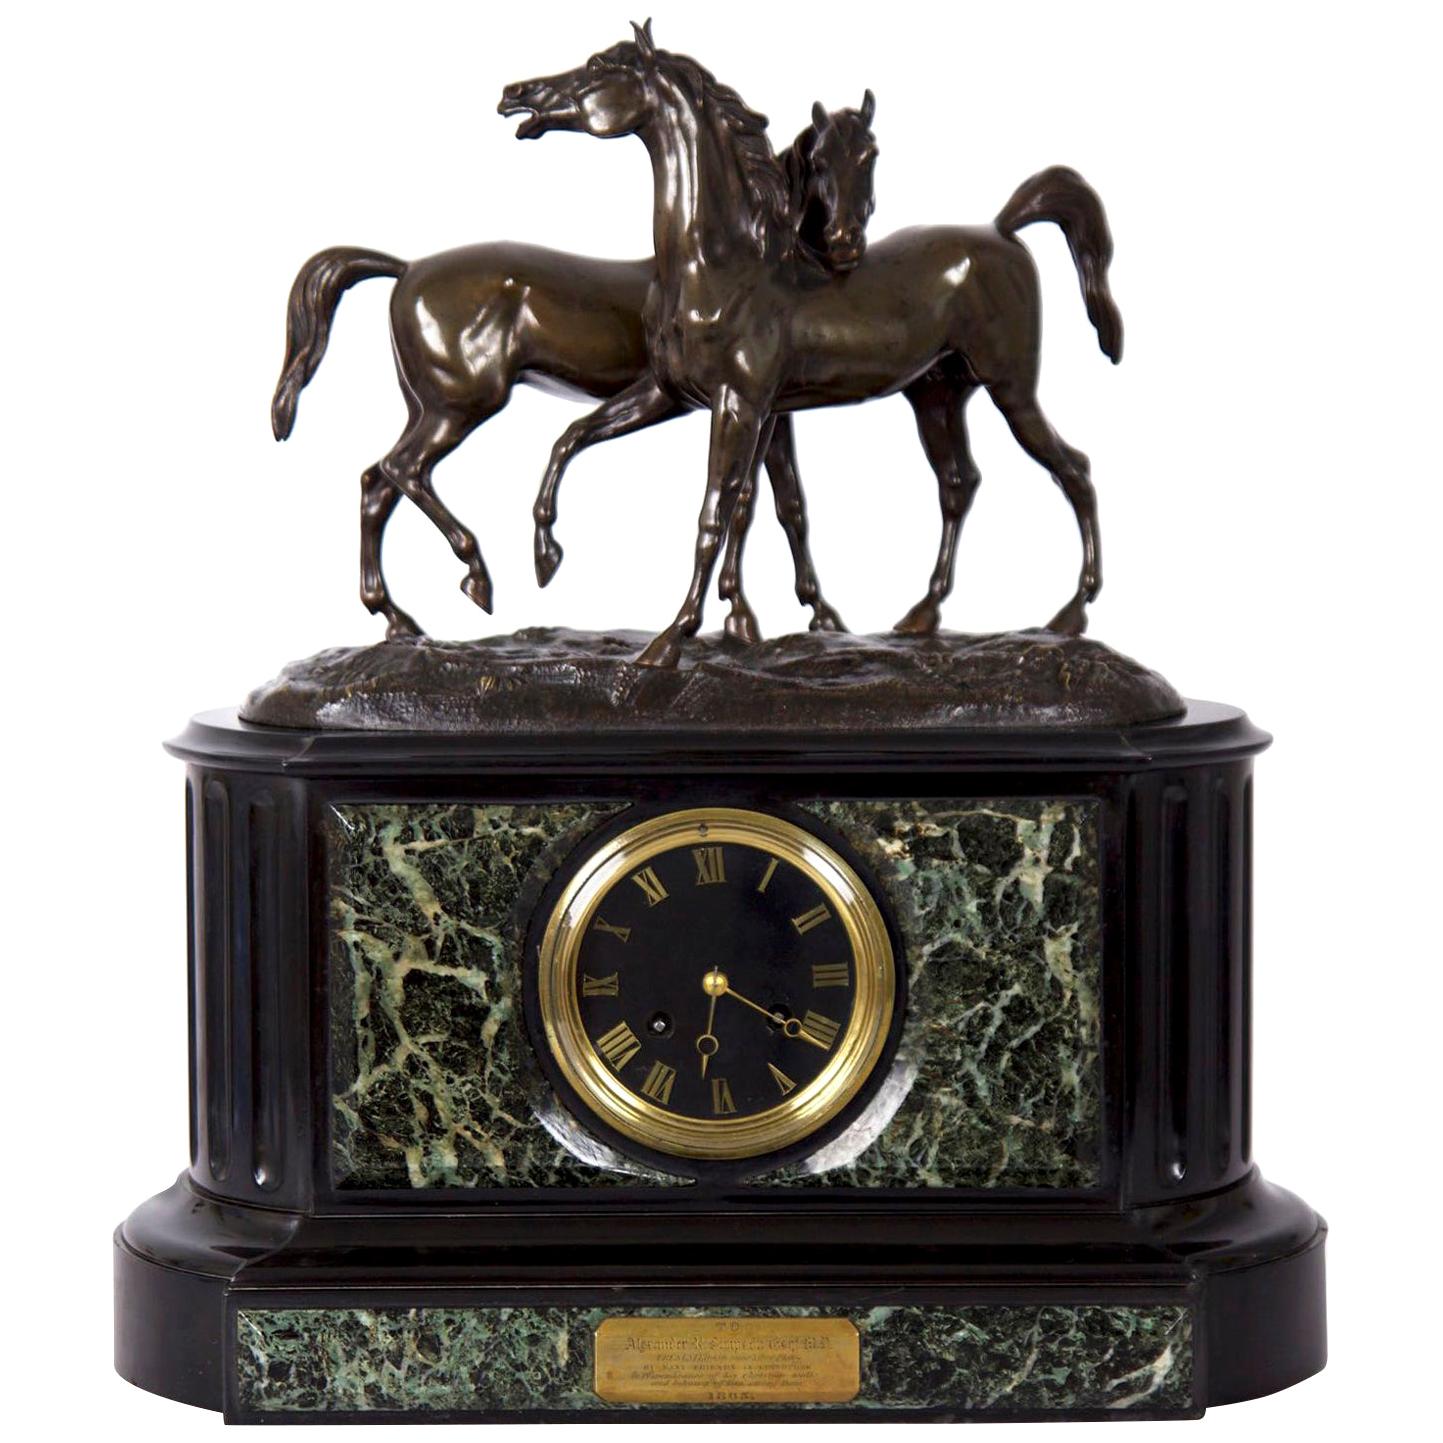 Marble and Black Slate Mantel Clock with Equestrian Sculpture Group, circa 1865